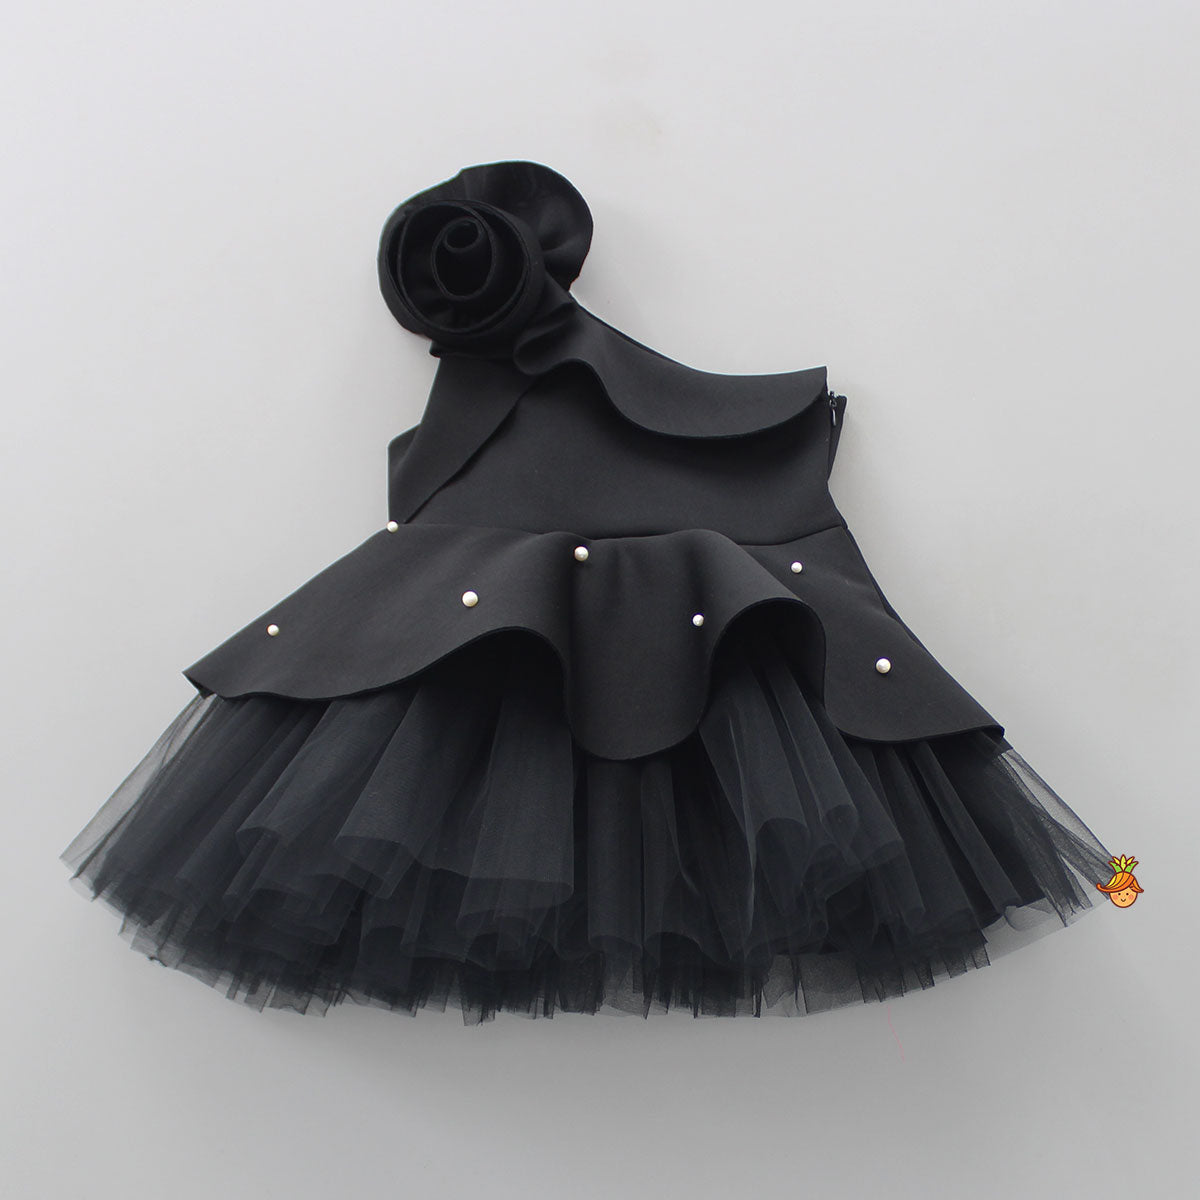 Pre Order: Exquisite Pearls And Rose Embellished Frilly Black Scuba Dress